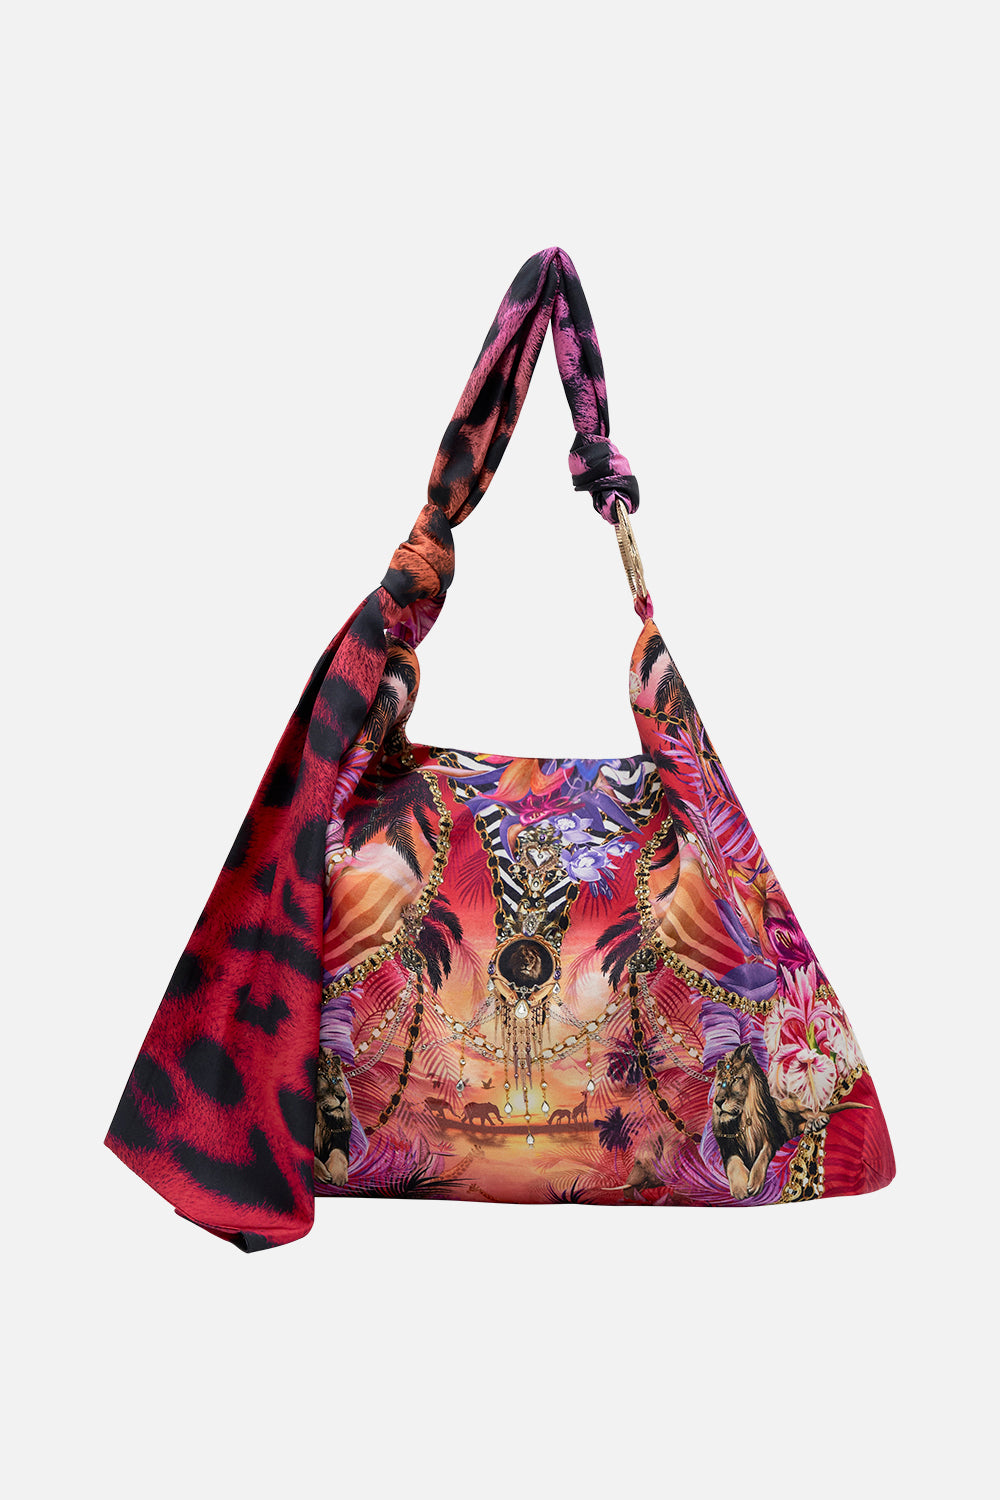 Front product view of CAMILLA Beach Bag in Wild Loving print